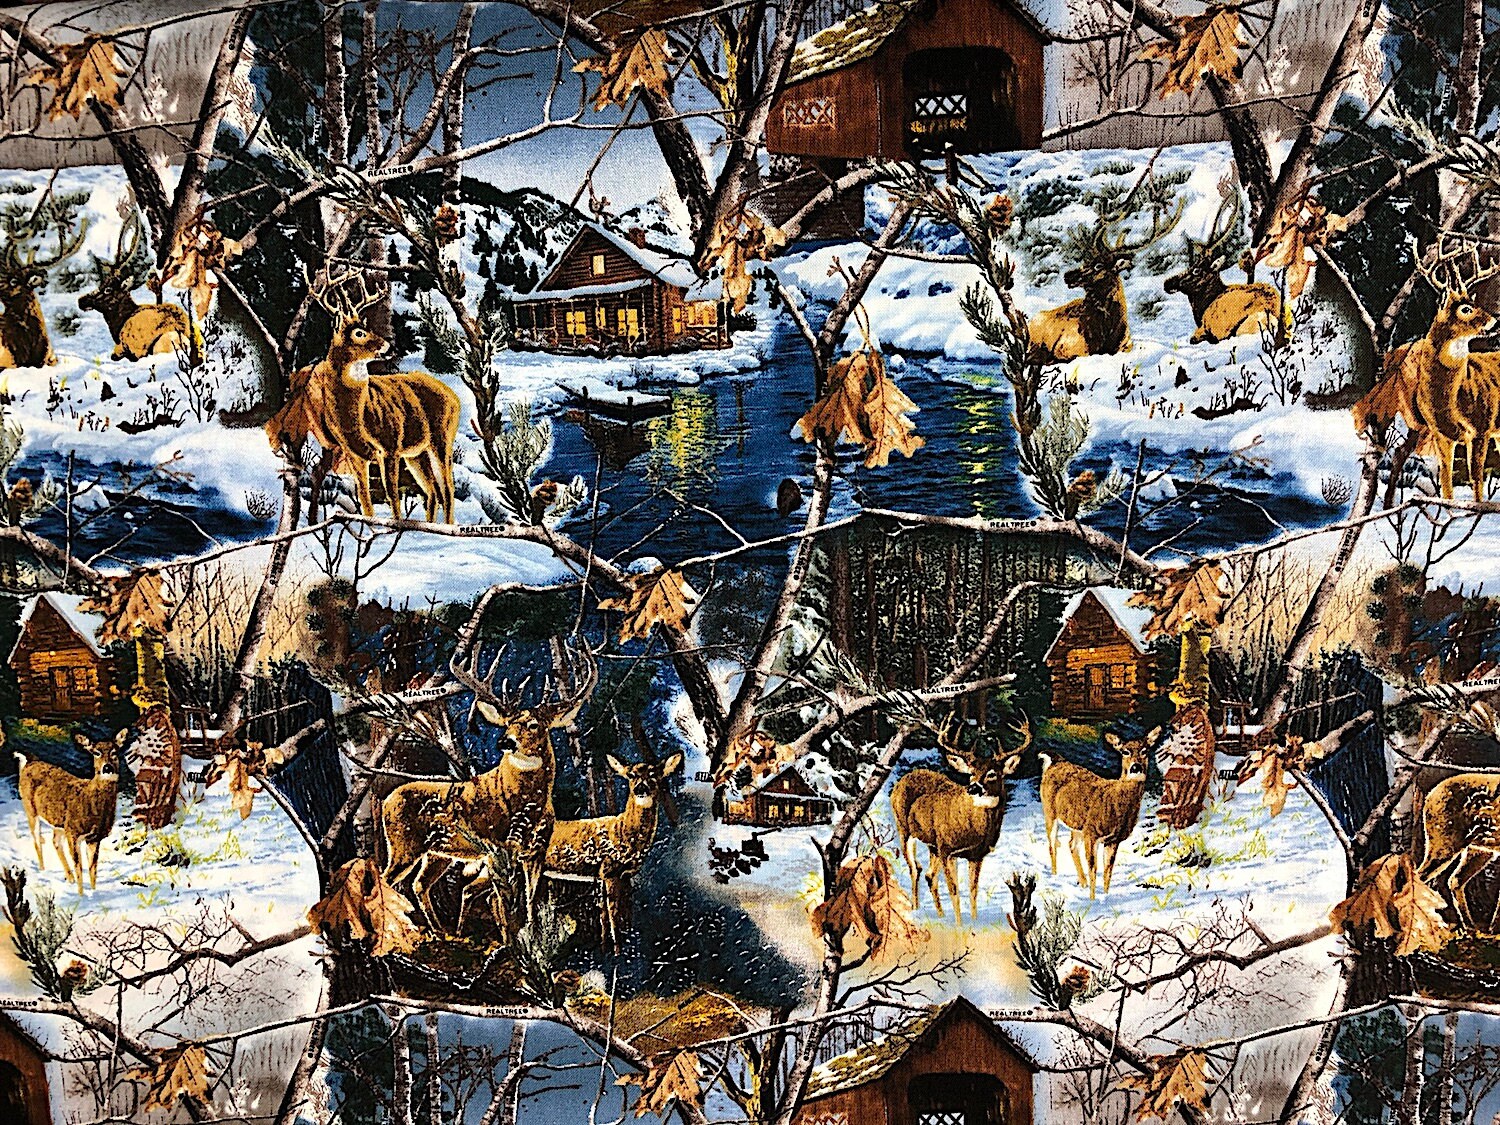 Cotton fabric covered with water, deer, cabins, trees and more